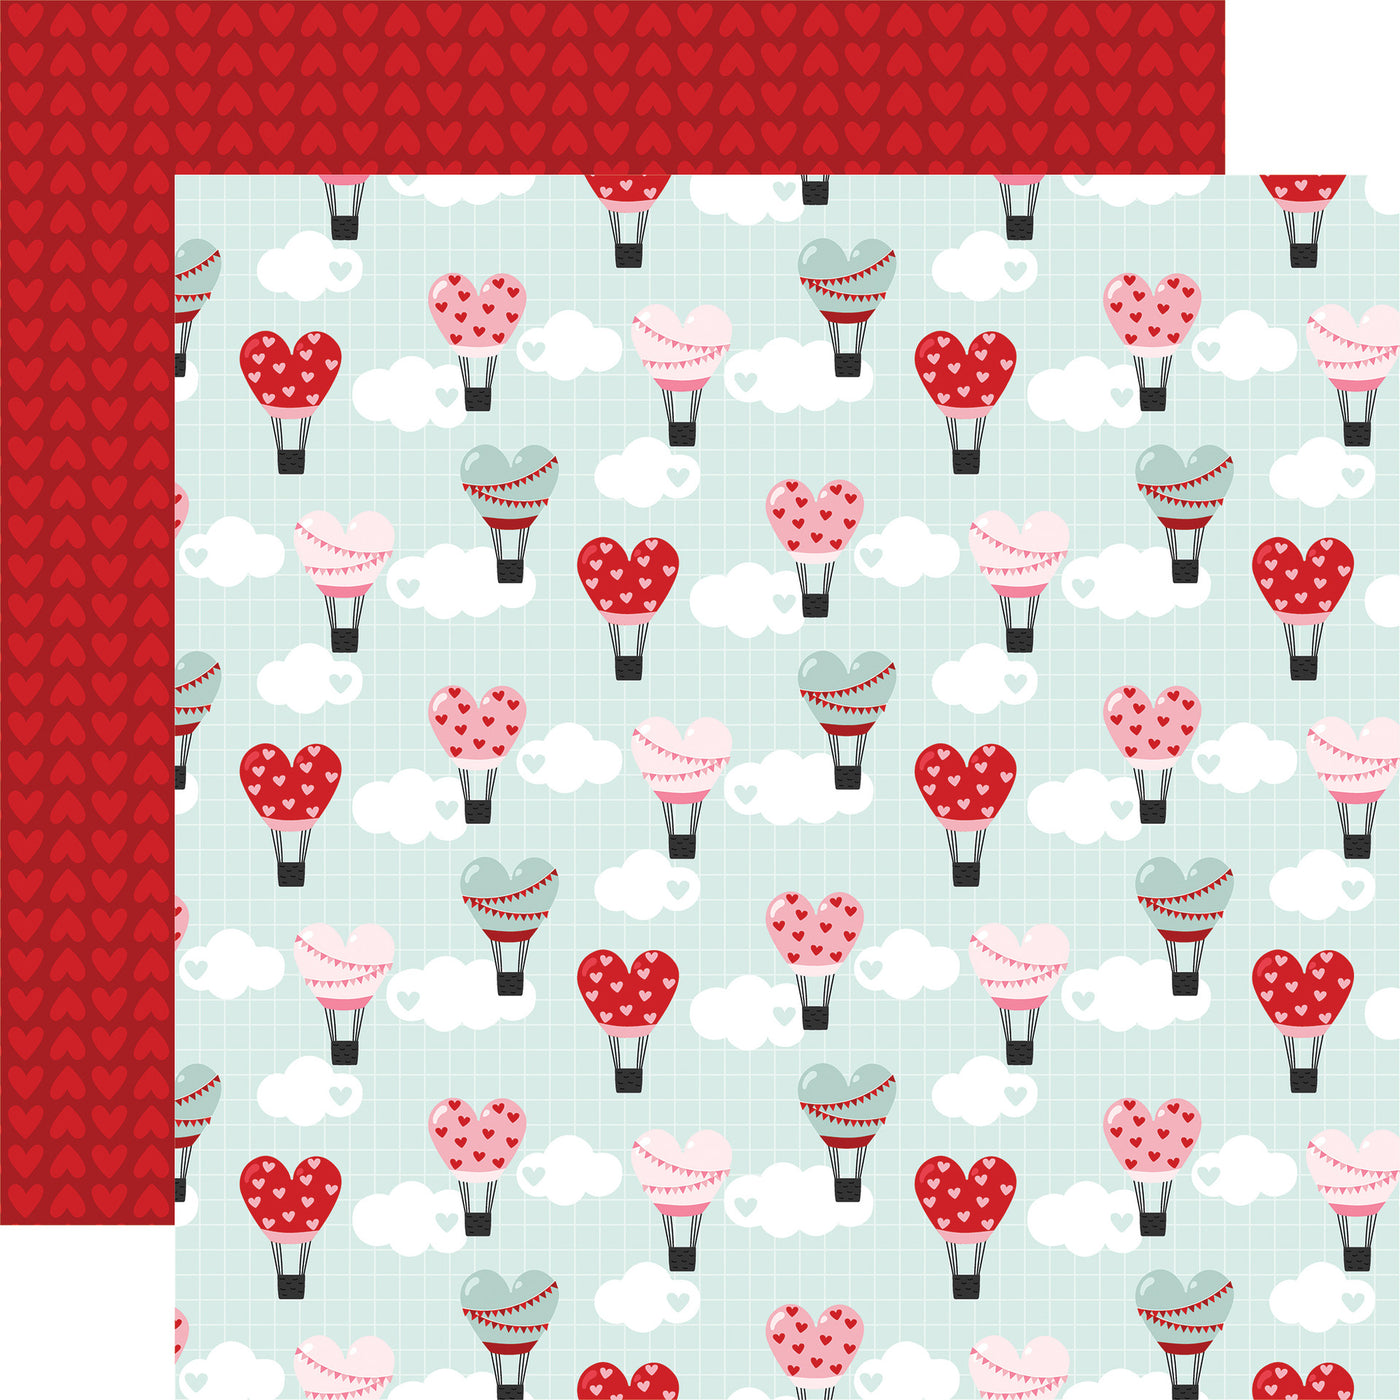 12x12 double-sided sheet. (Side A - fun, red, pink, and teal hot air balloons on a teal background with white clouds; Side B - rows of red hearts on a dark red background)  Archival quality, acid-free. 